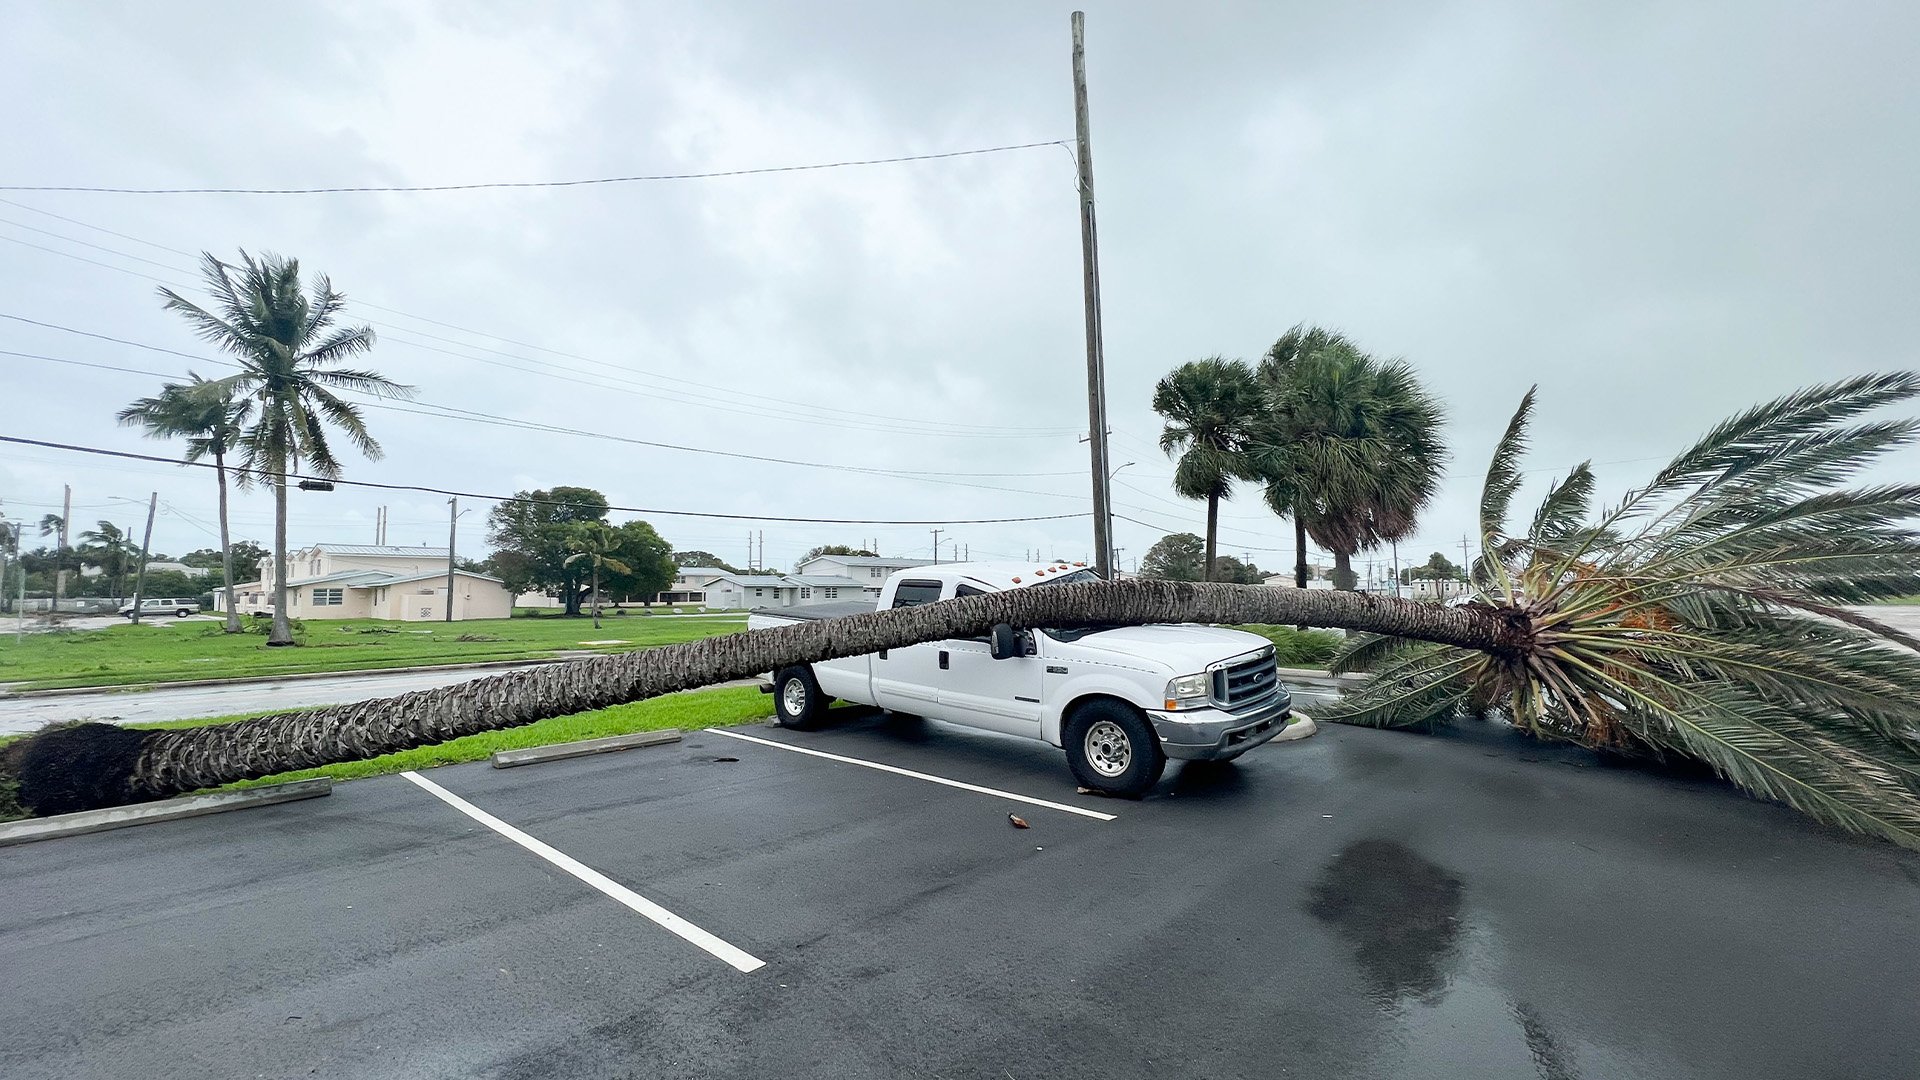 A palm tree felled by Hurricane Ian crushed a truck parked at Naval Air Station Key West’s Trumbo Point Annex. US Navy photo.